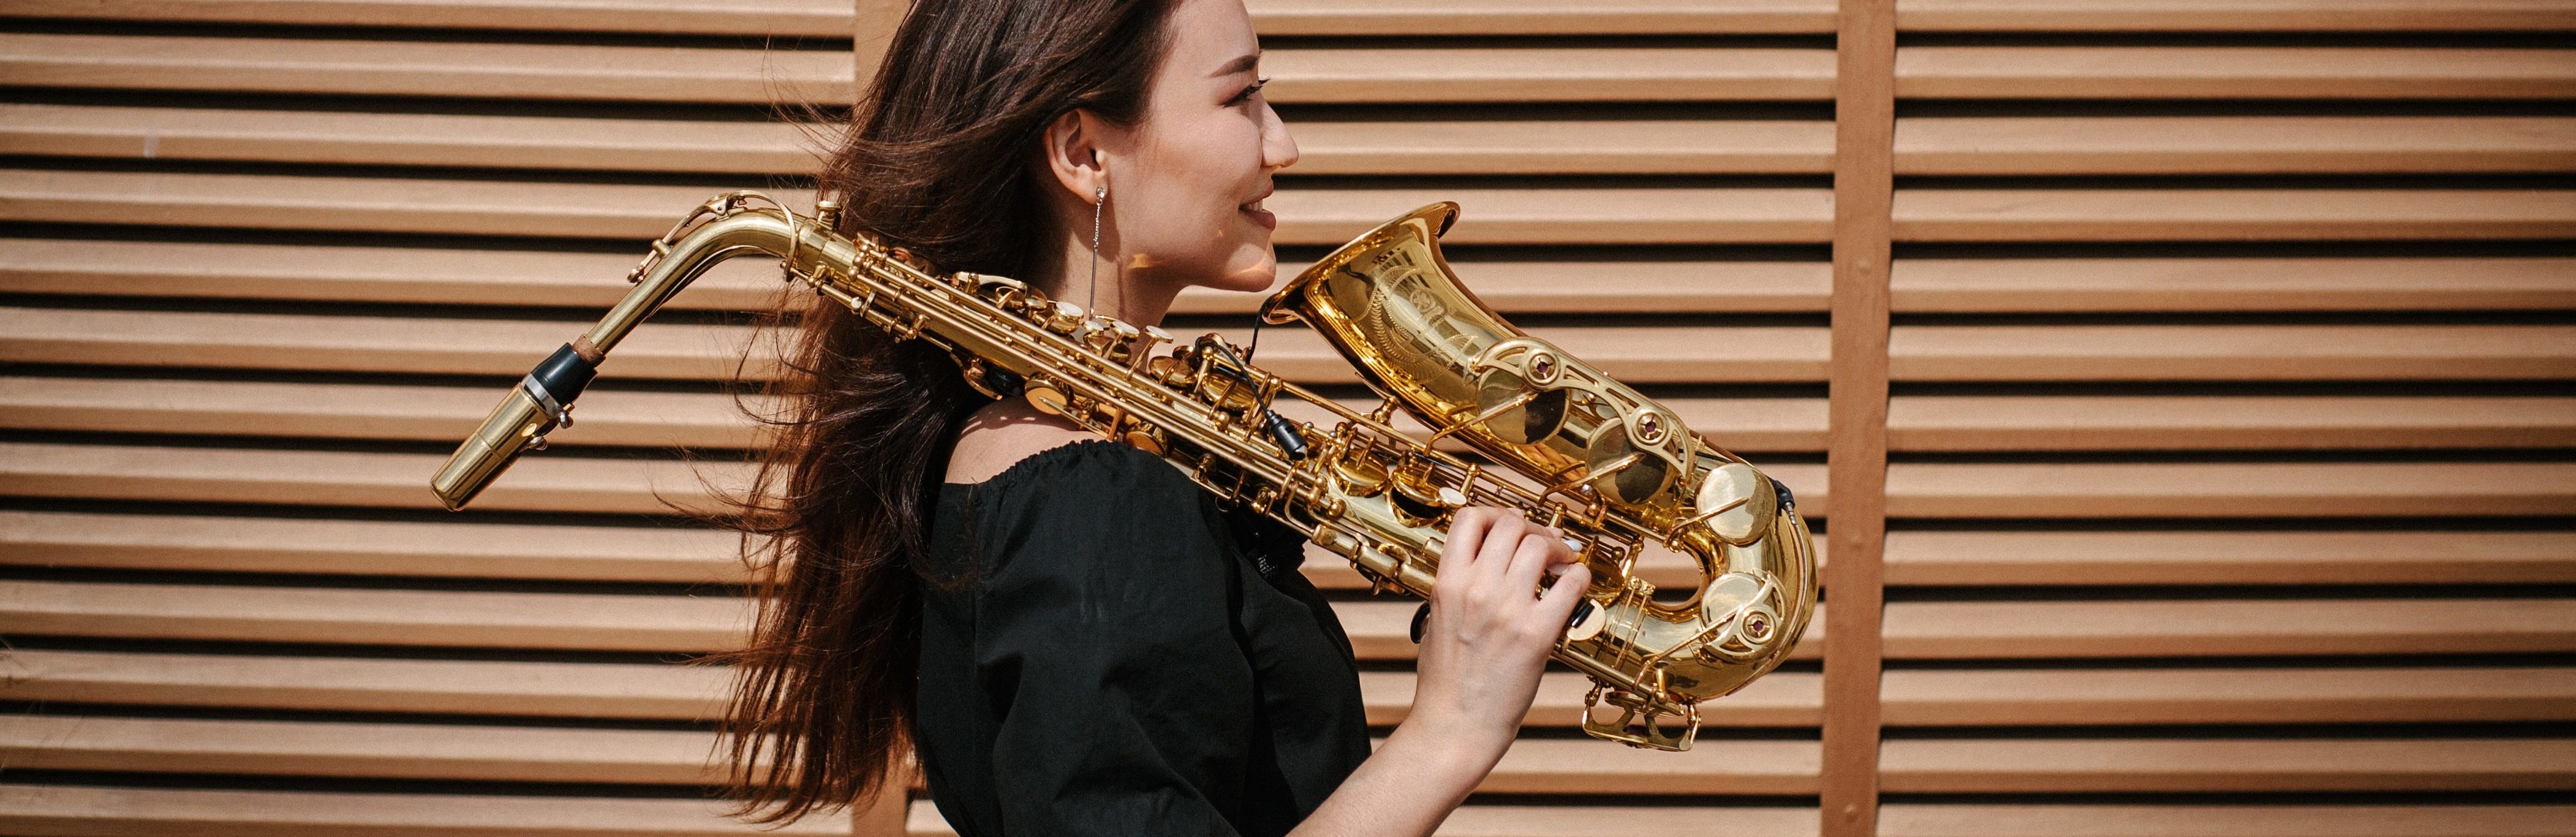 saxophone lessons for beginners in Eltham